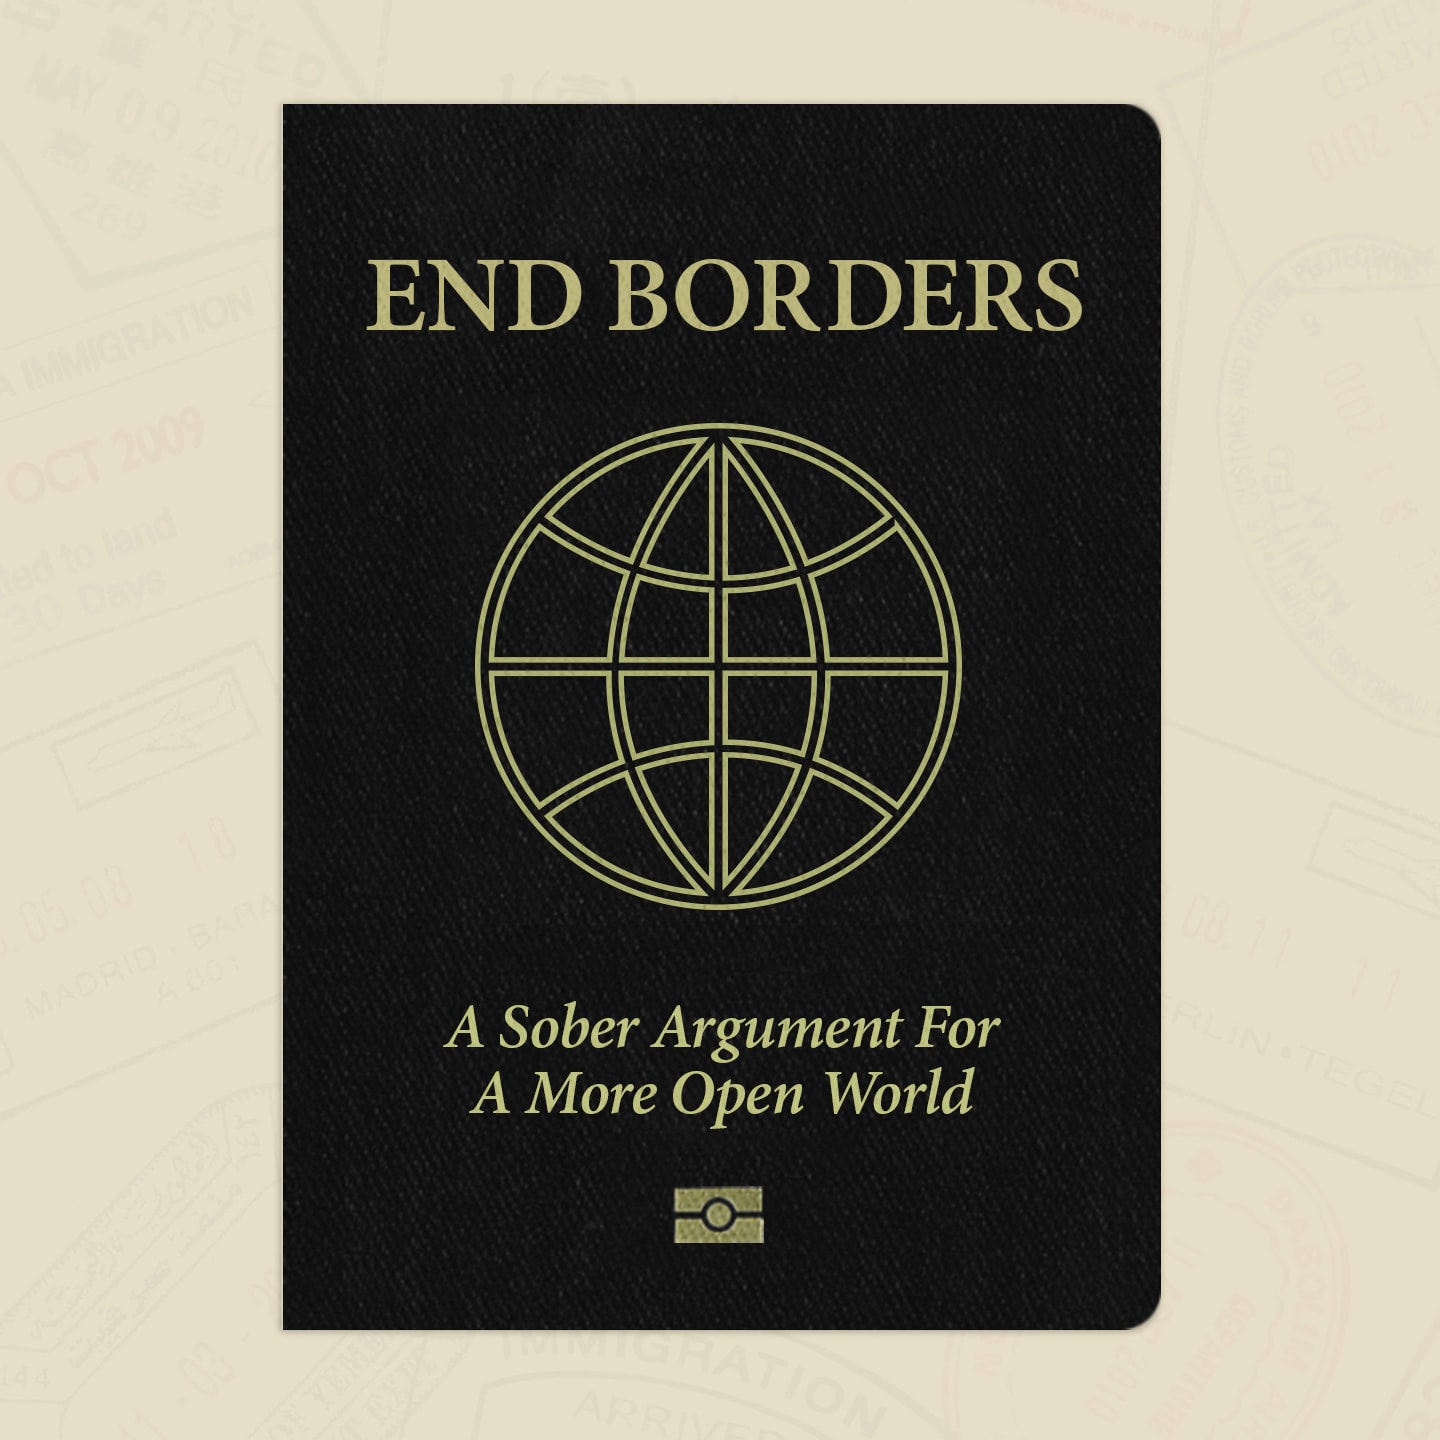 Renegade Academics Are Pushing To Open Up All The Borders In The Whole Damn World